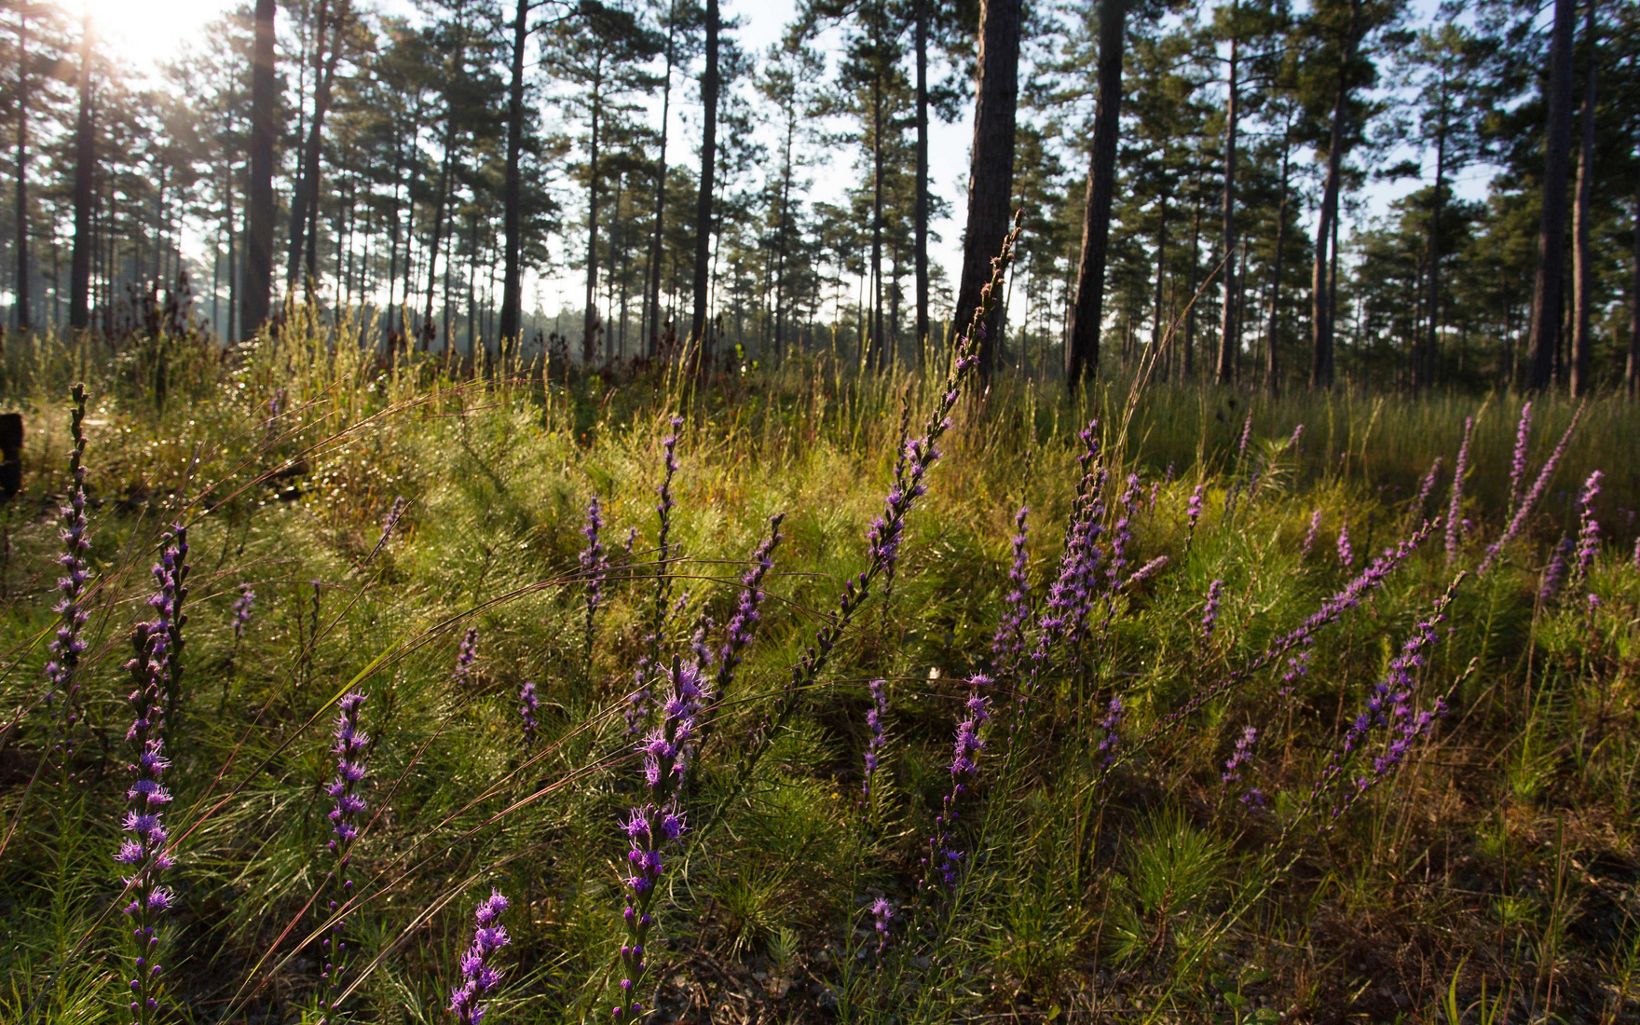 The purple blossoms of tall, thin wildflowers stand out above short pine seedlings. Mature pine trees stand out against a blue sky in the background.